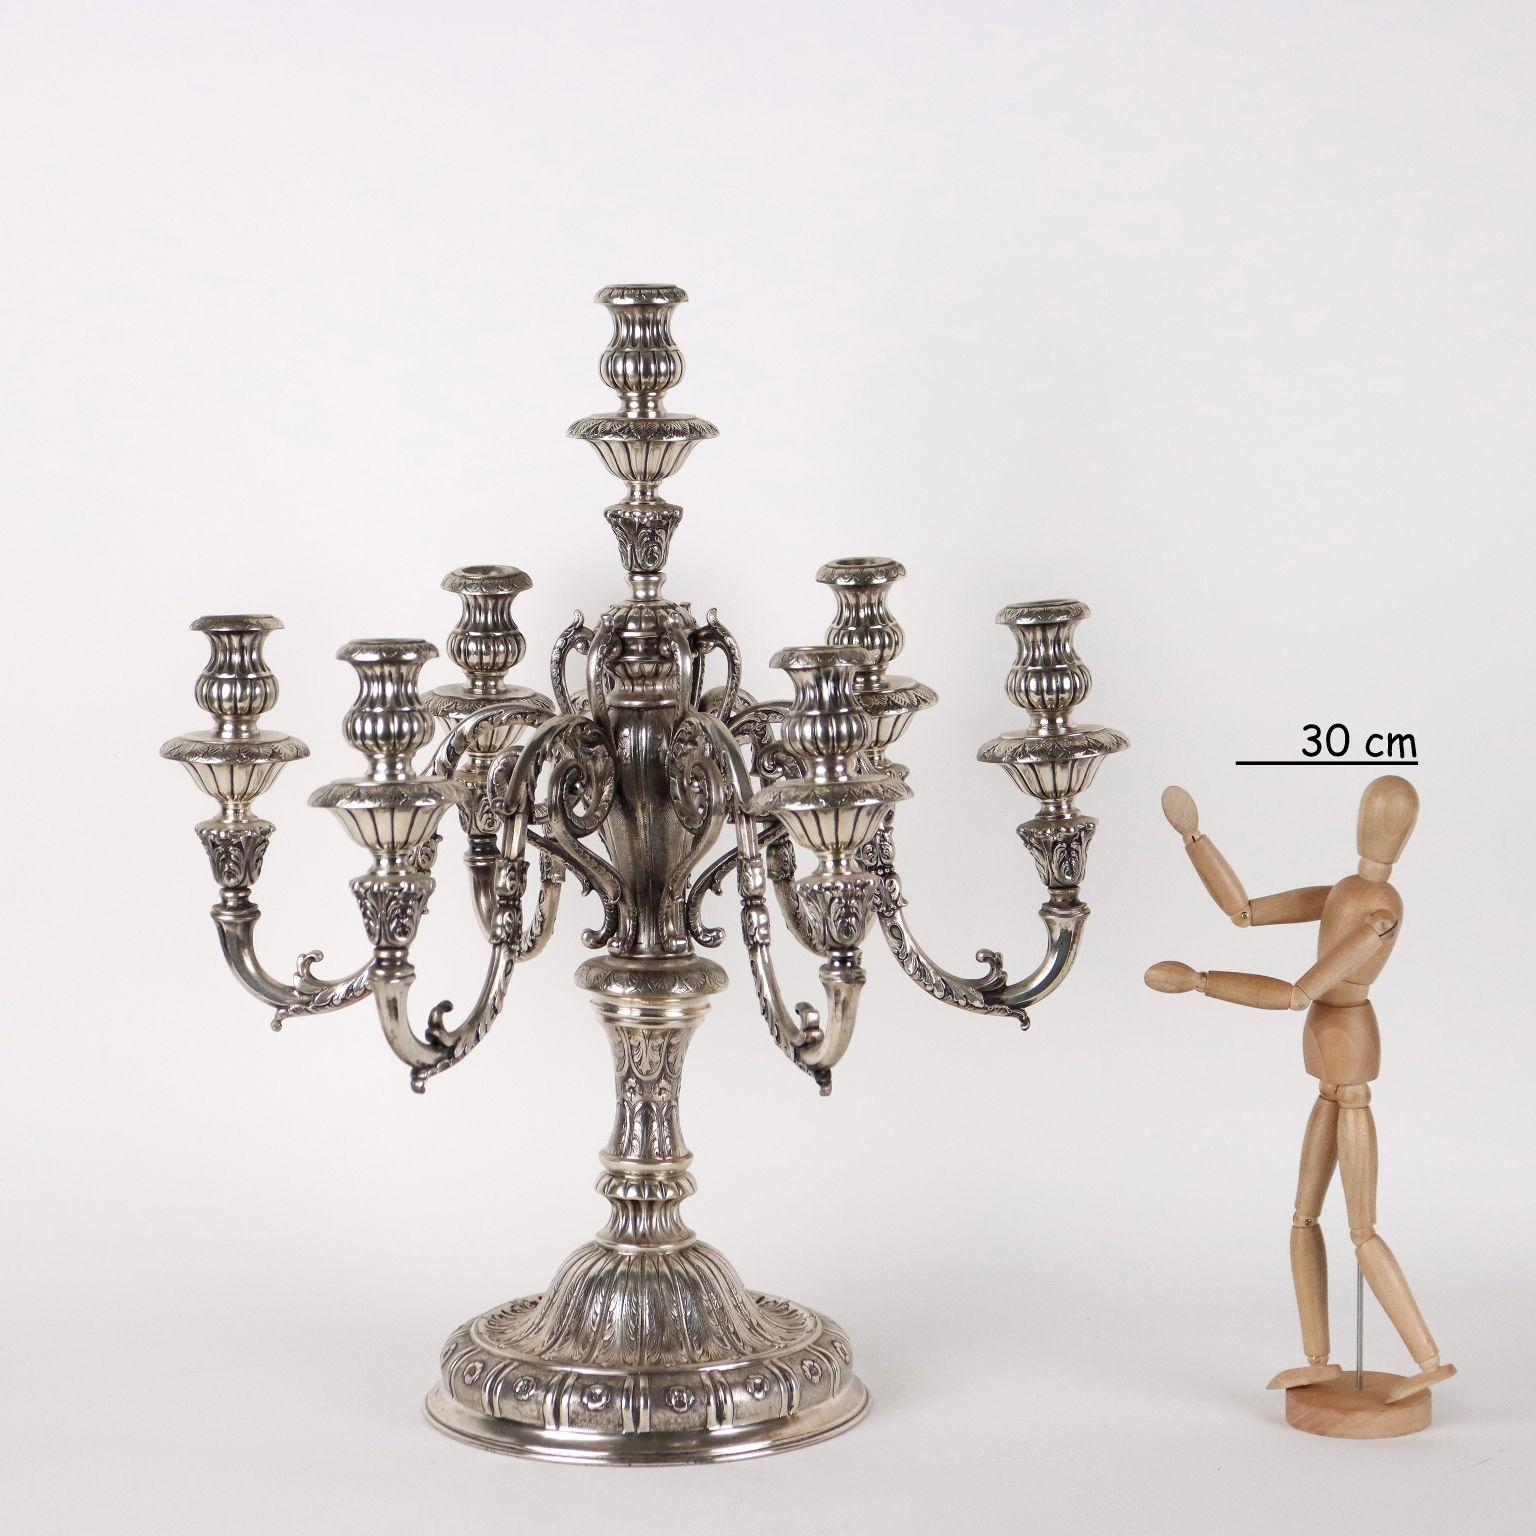 Pair of large seven-flame candelabra in embossed and finely chiselled silver. Rich decorations with plant motifs and arms with leafy volutes. Brand of the silver incusso, the Milanese silversmith's brand is hard to read. 8500 grams.